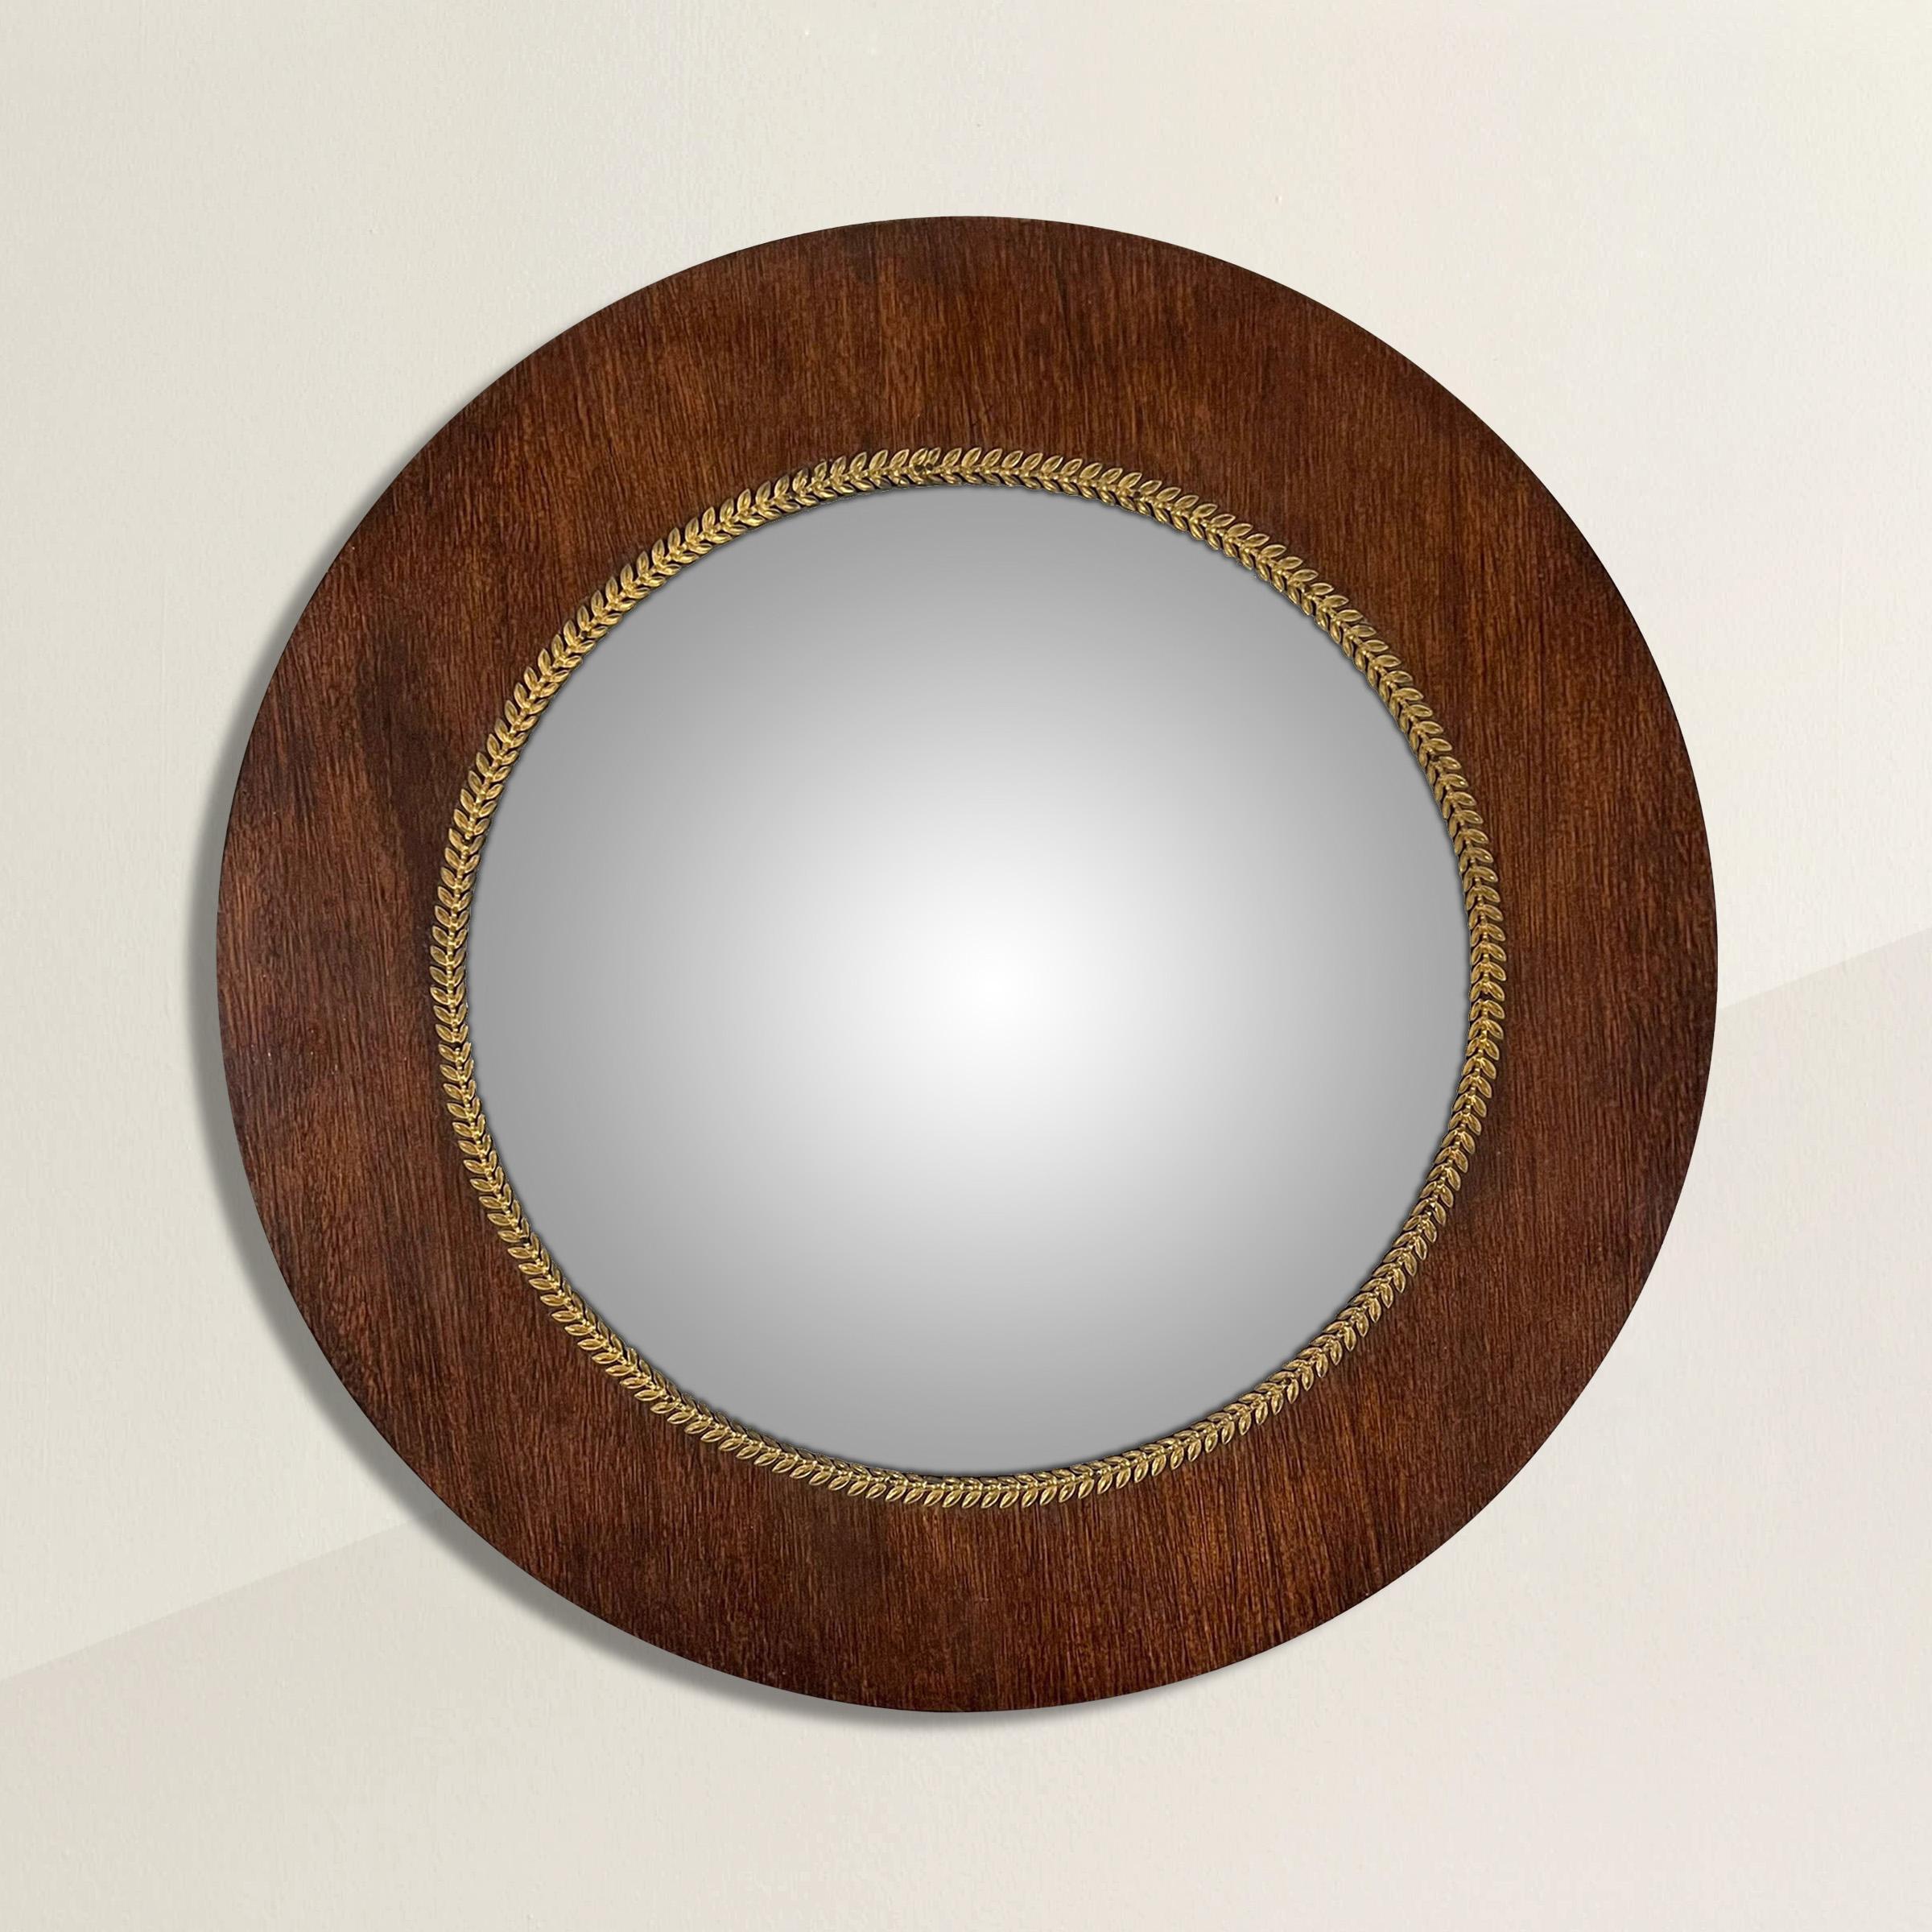 A stunning early 19th century French Empire mahogany framed convex mirror with a thin gilt bronze laurel wreath trim. Unlike most convex mirrors that are domed, this mirror has a flatter dome that curved back close to the edges. Convex mirrors